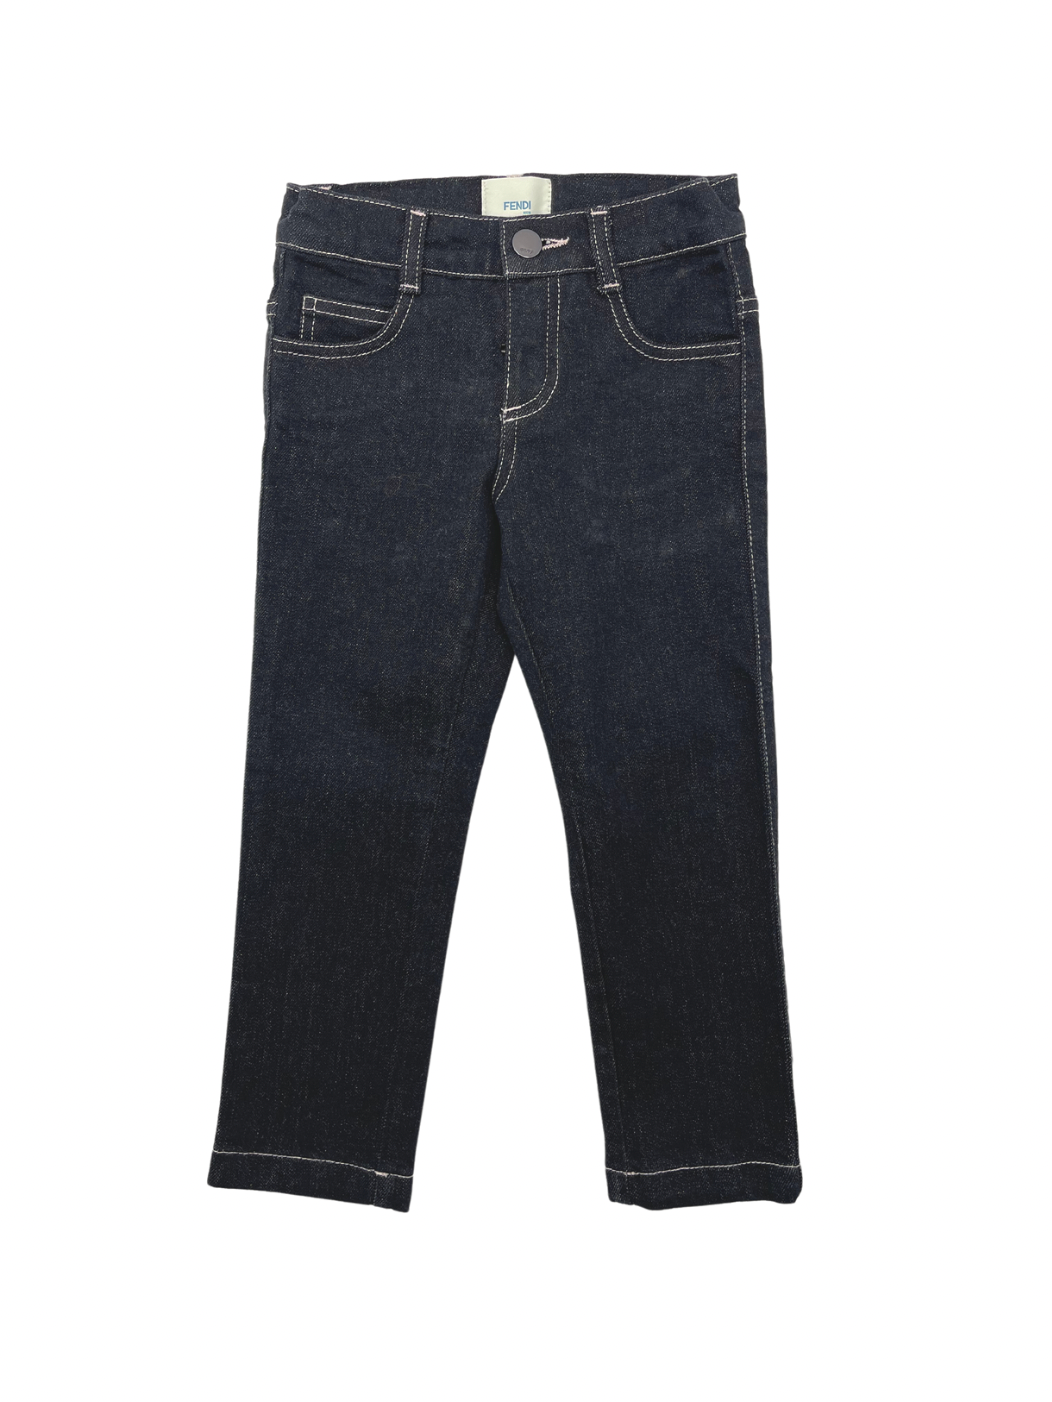 FENDI - Black jeans with pink back pocket with logo - 4 years old